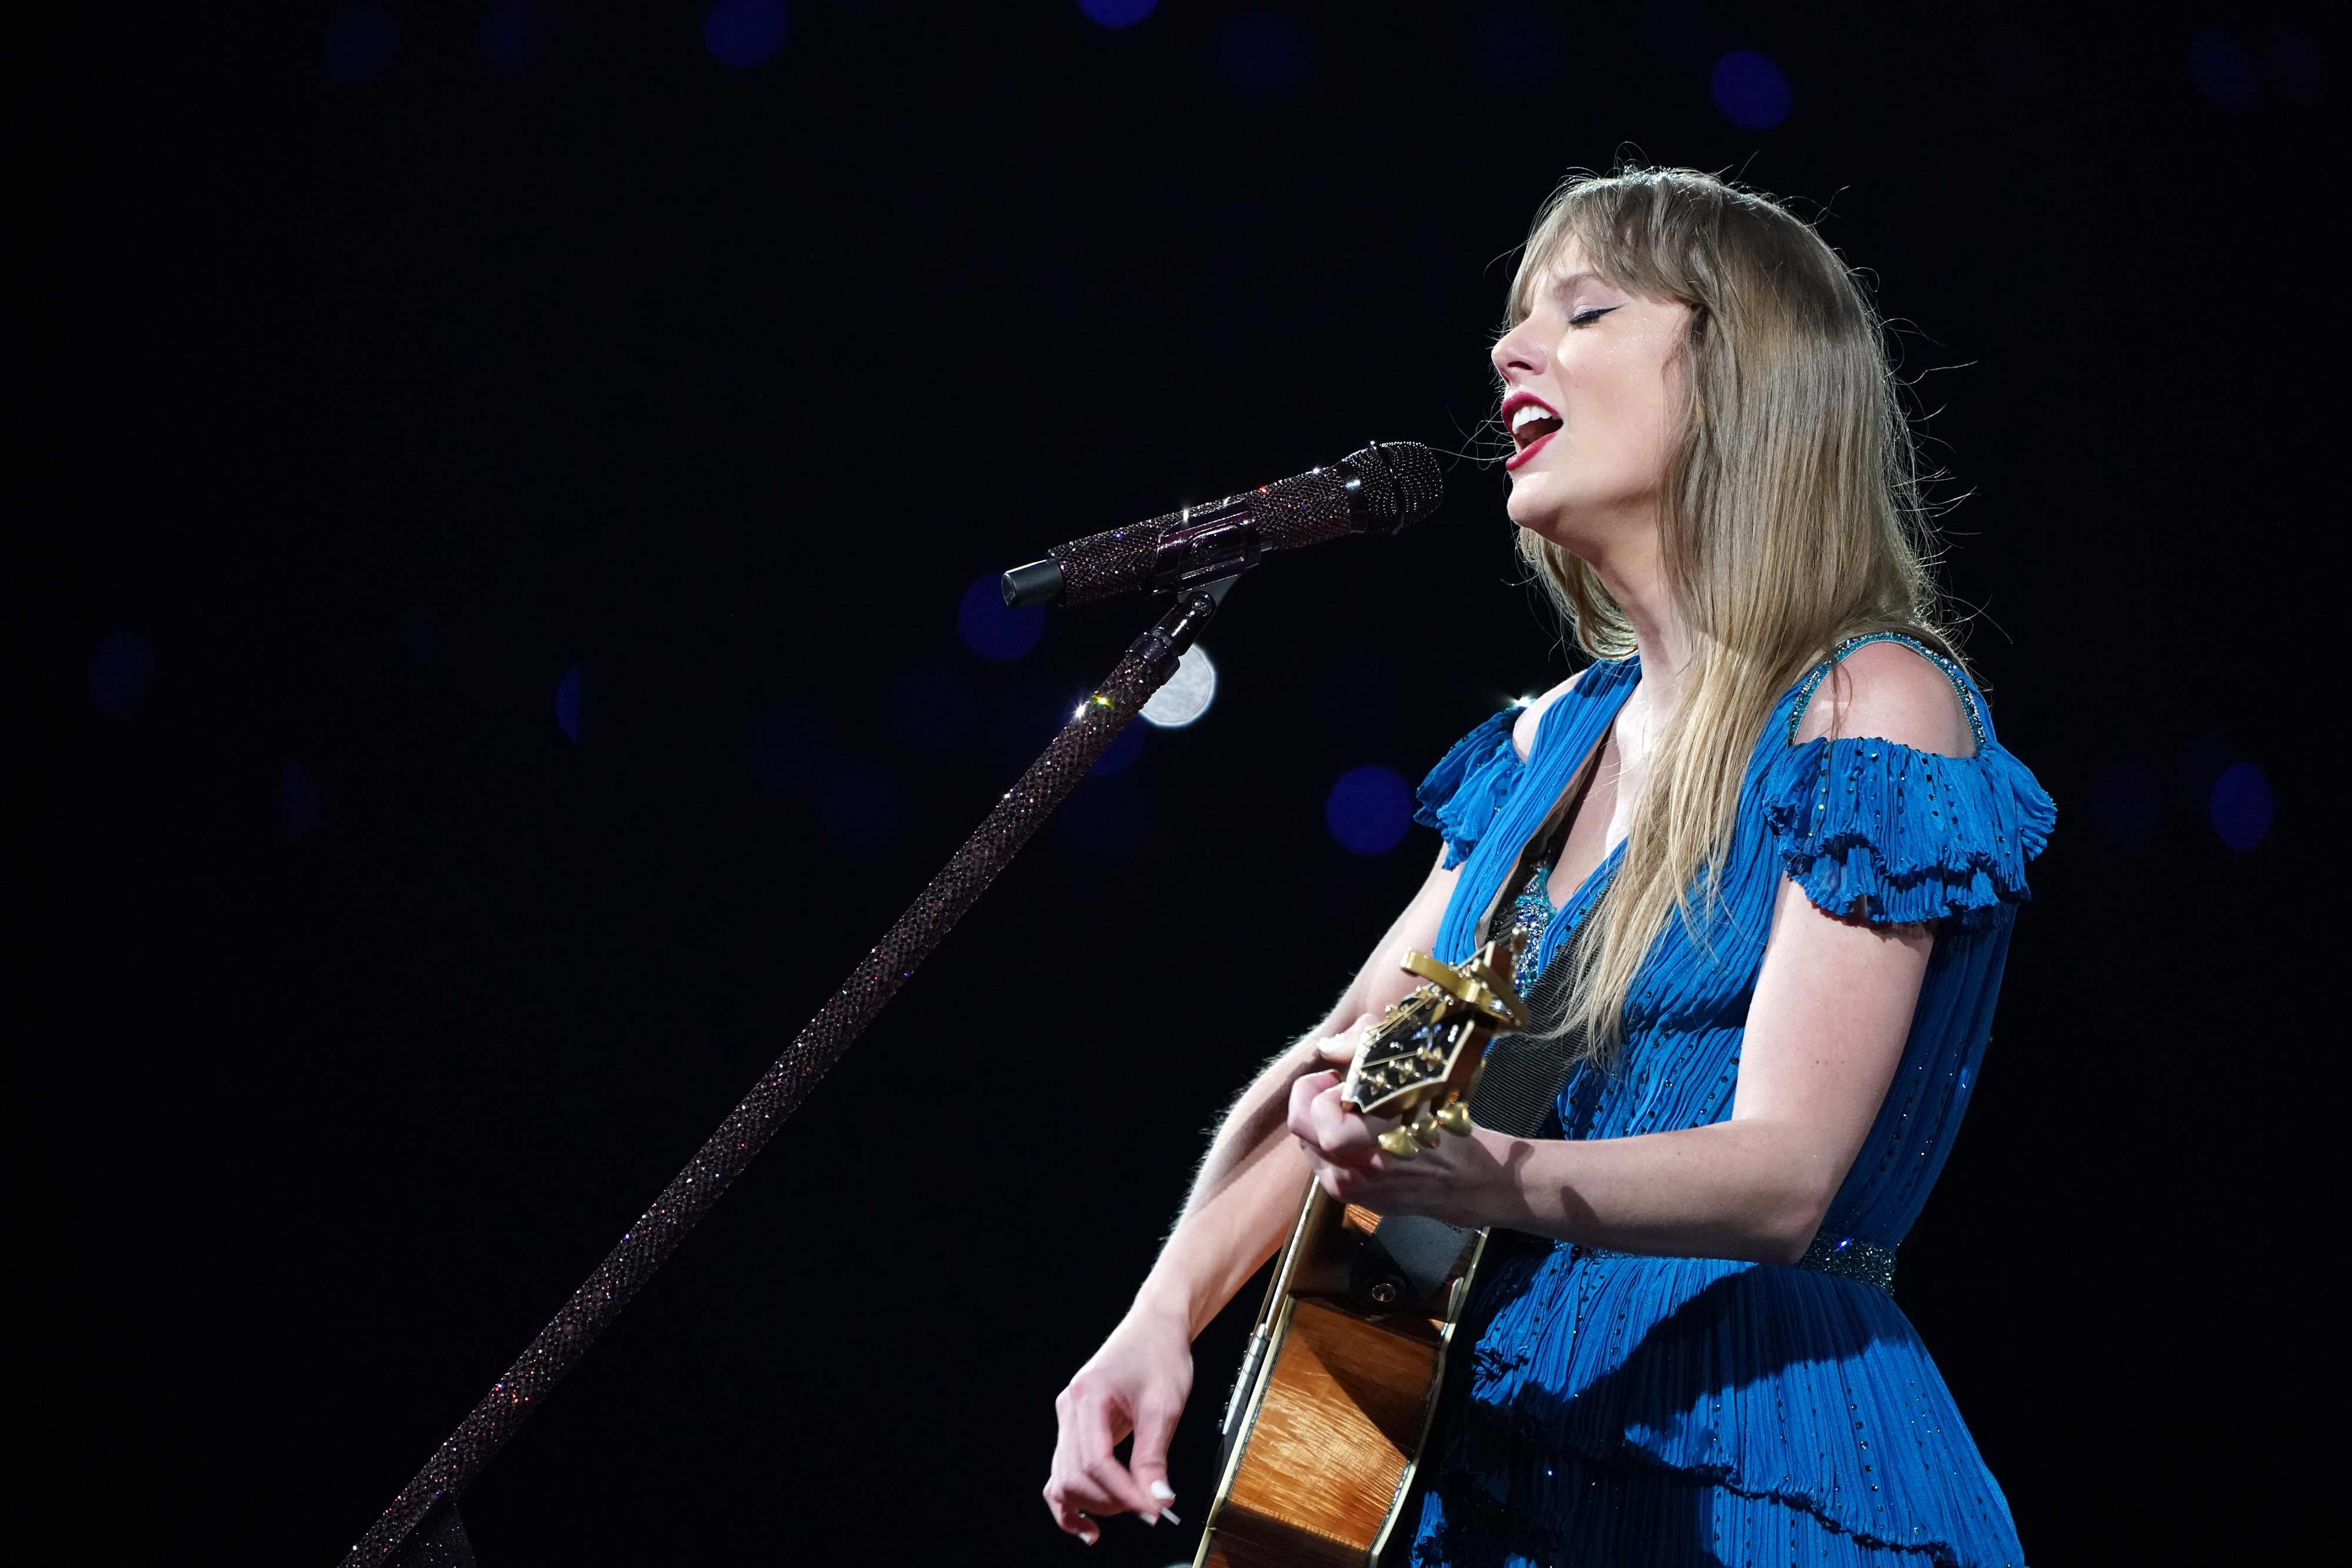 Taylor in a blue fringe dress playing guitar and singing into a microphone onstage